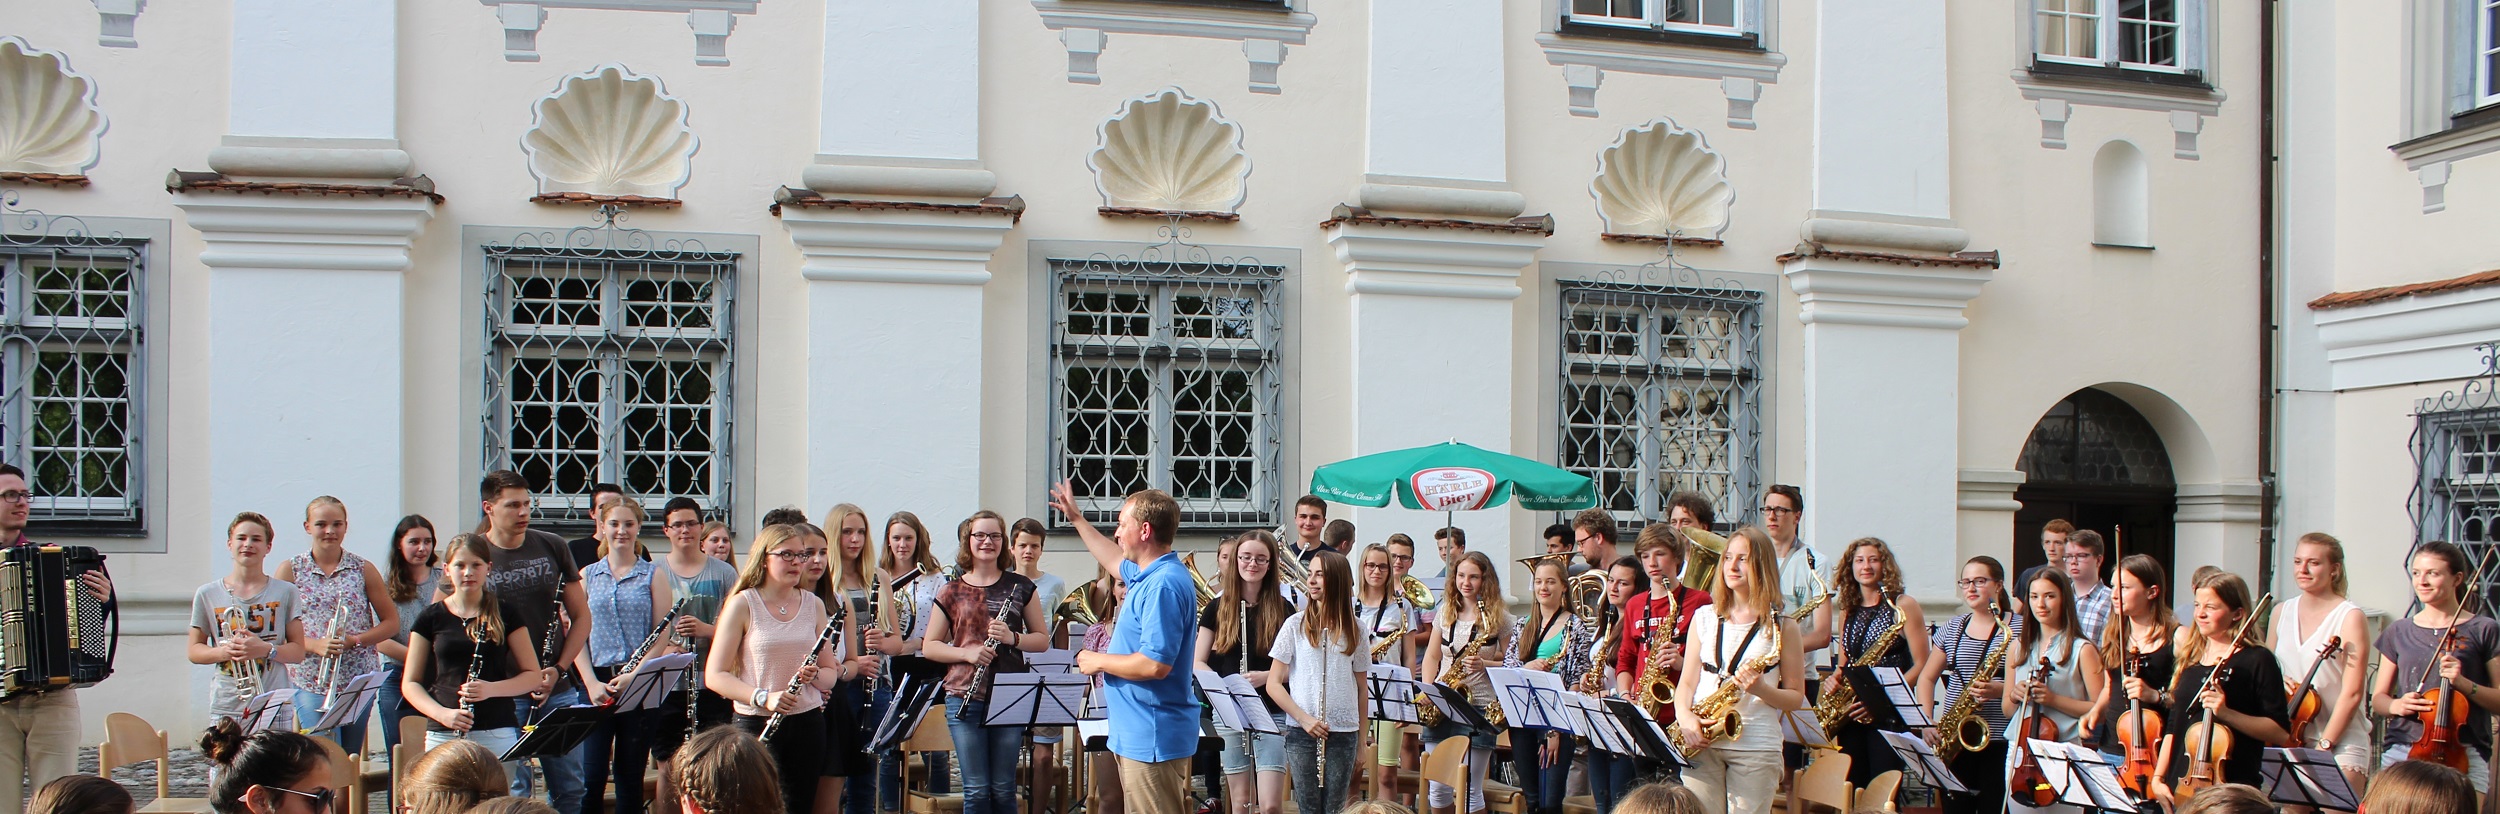 Big Band beim Open-Air in Rot